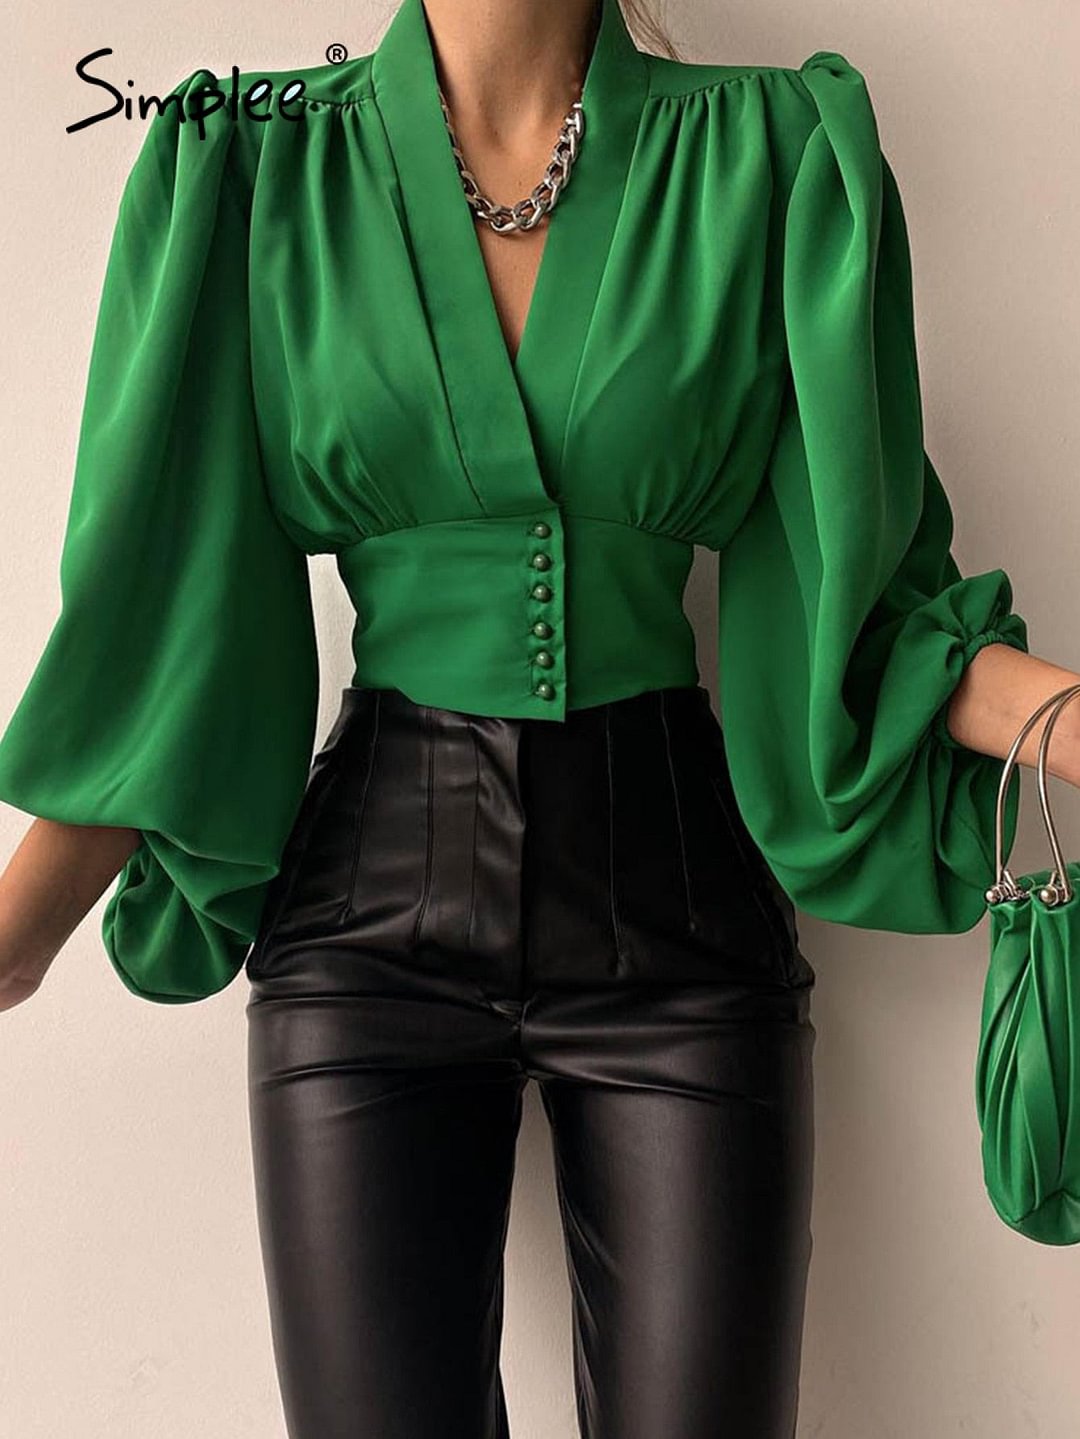 Simplee Office lady v-neck lantern long sleeve blouse green  Black skinny casual women blouse shirt  Spring floral retro shirts